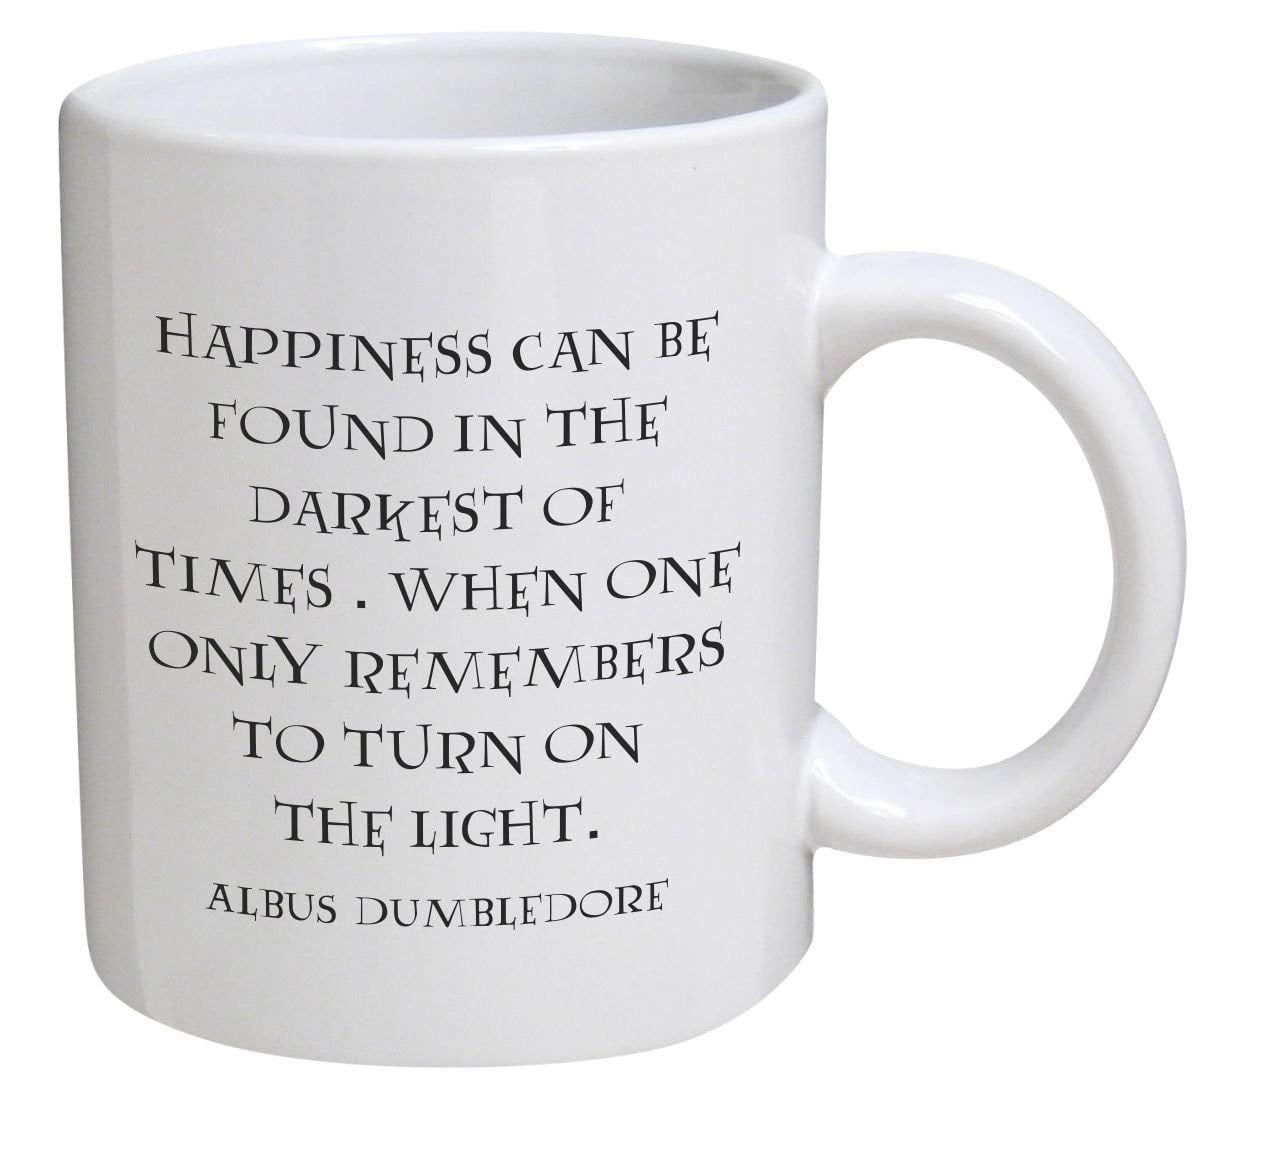 A lovely Mug with Harry Potter Inspired It's Our Choices Abilities Dumbledore Quote Christmas Present Birthday Mug 